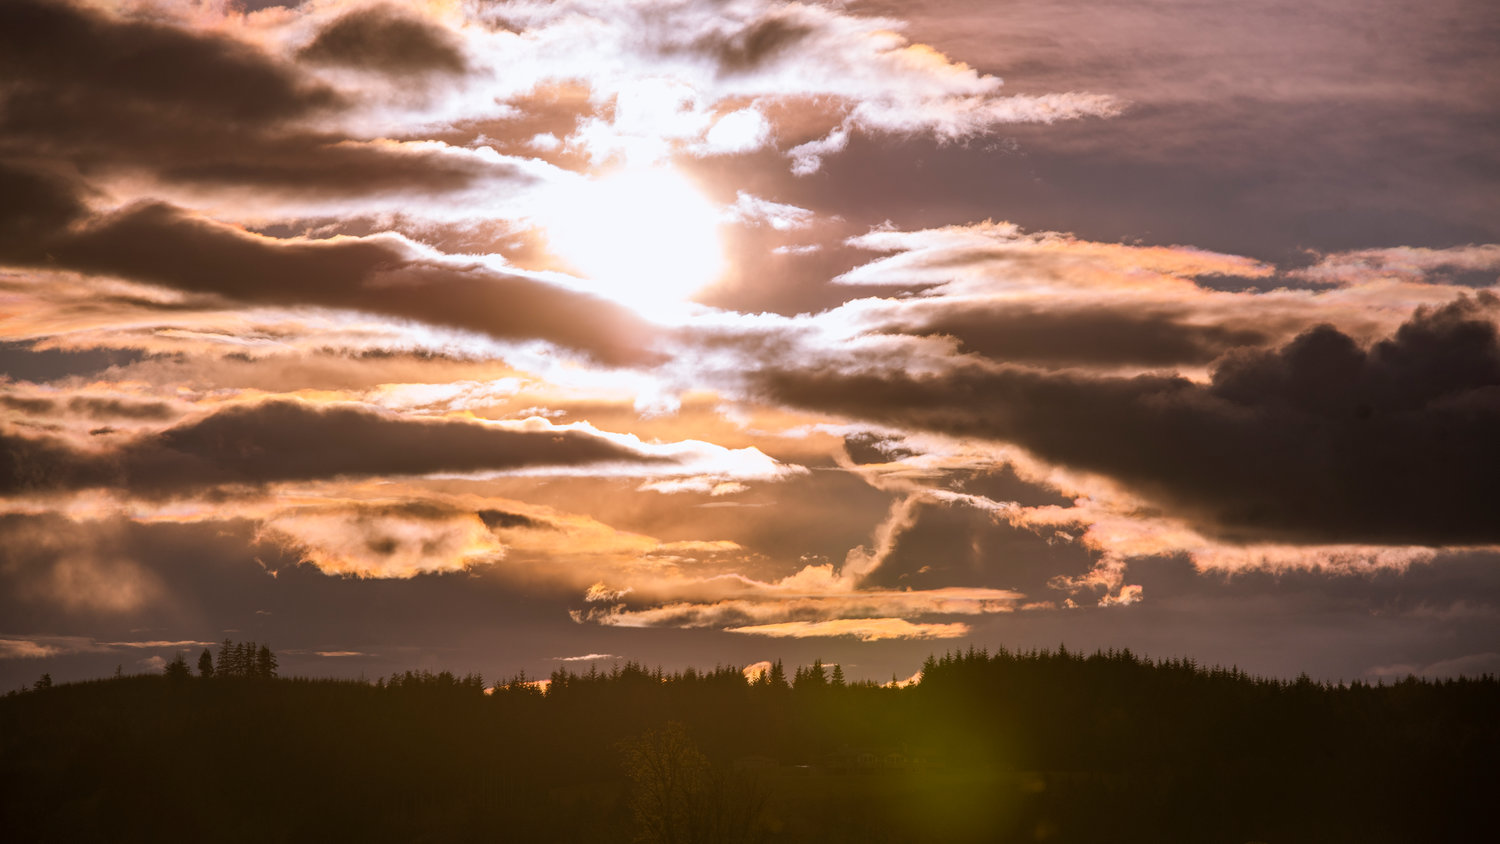 The sun sets through clouds over Chehalis.